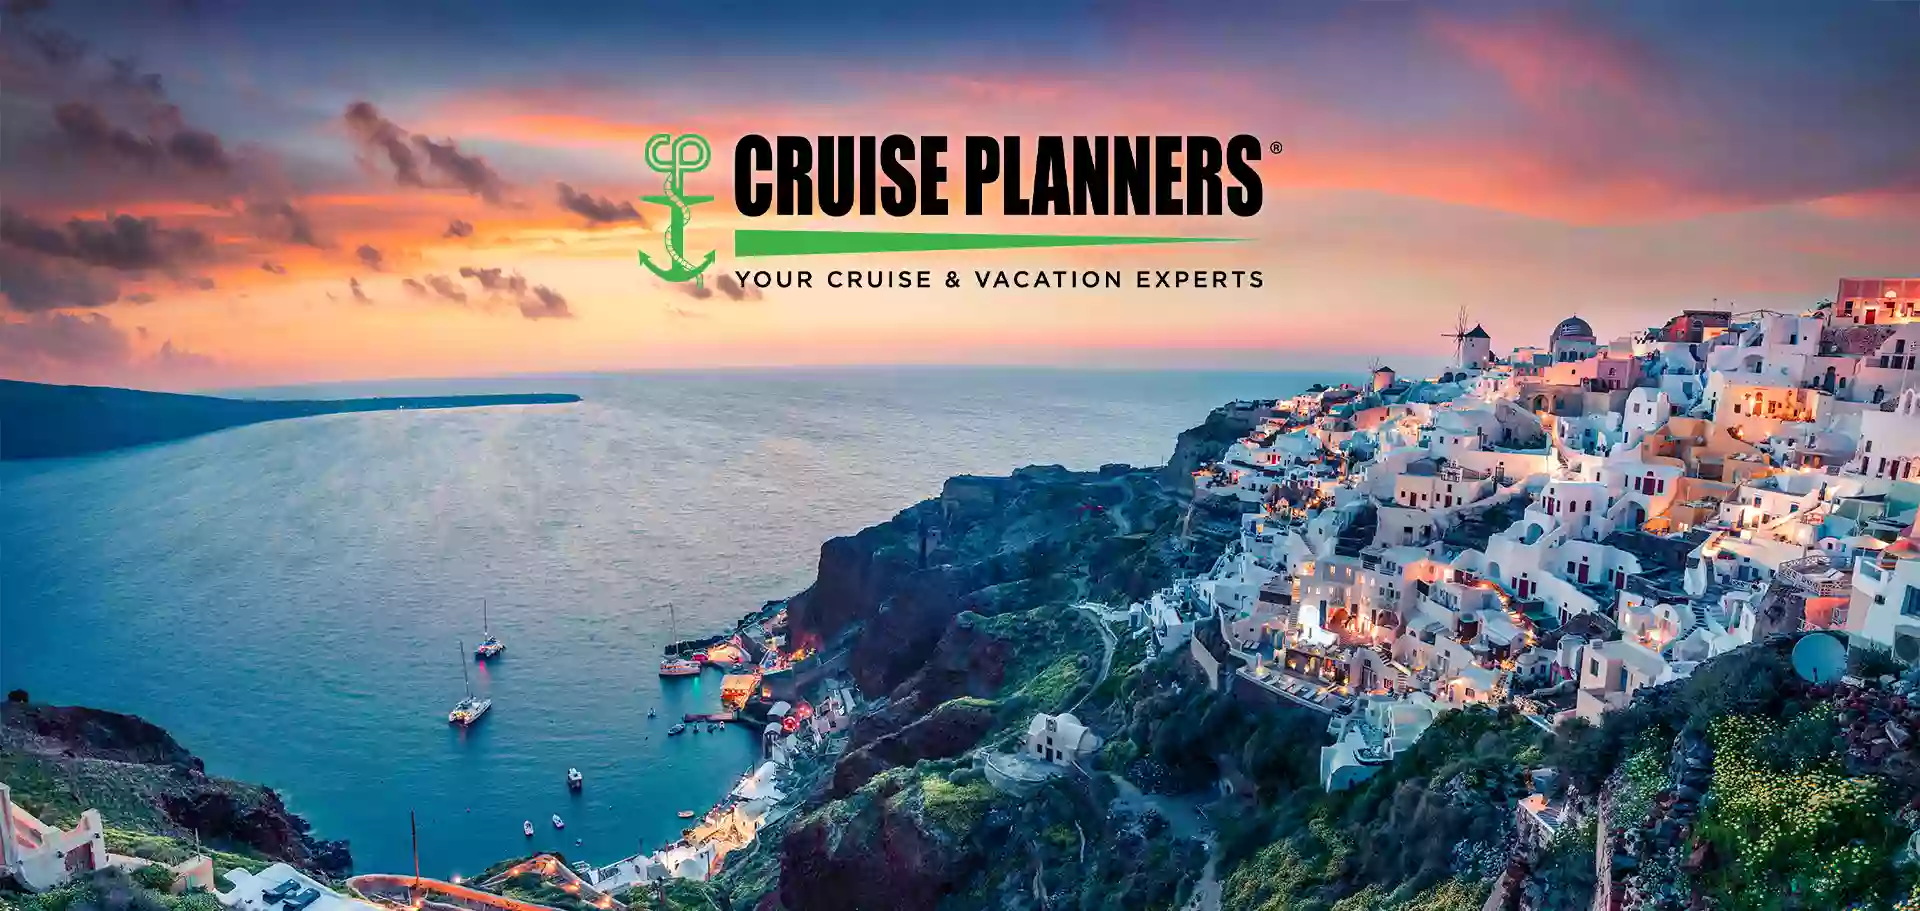 Lisa Martin Cruise Planners Total Travel Today LLC